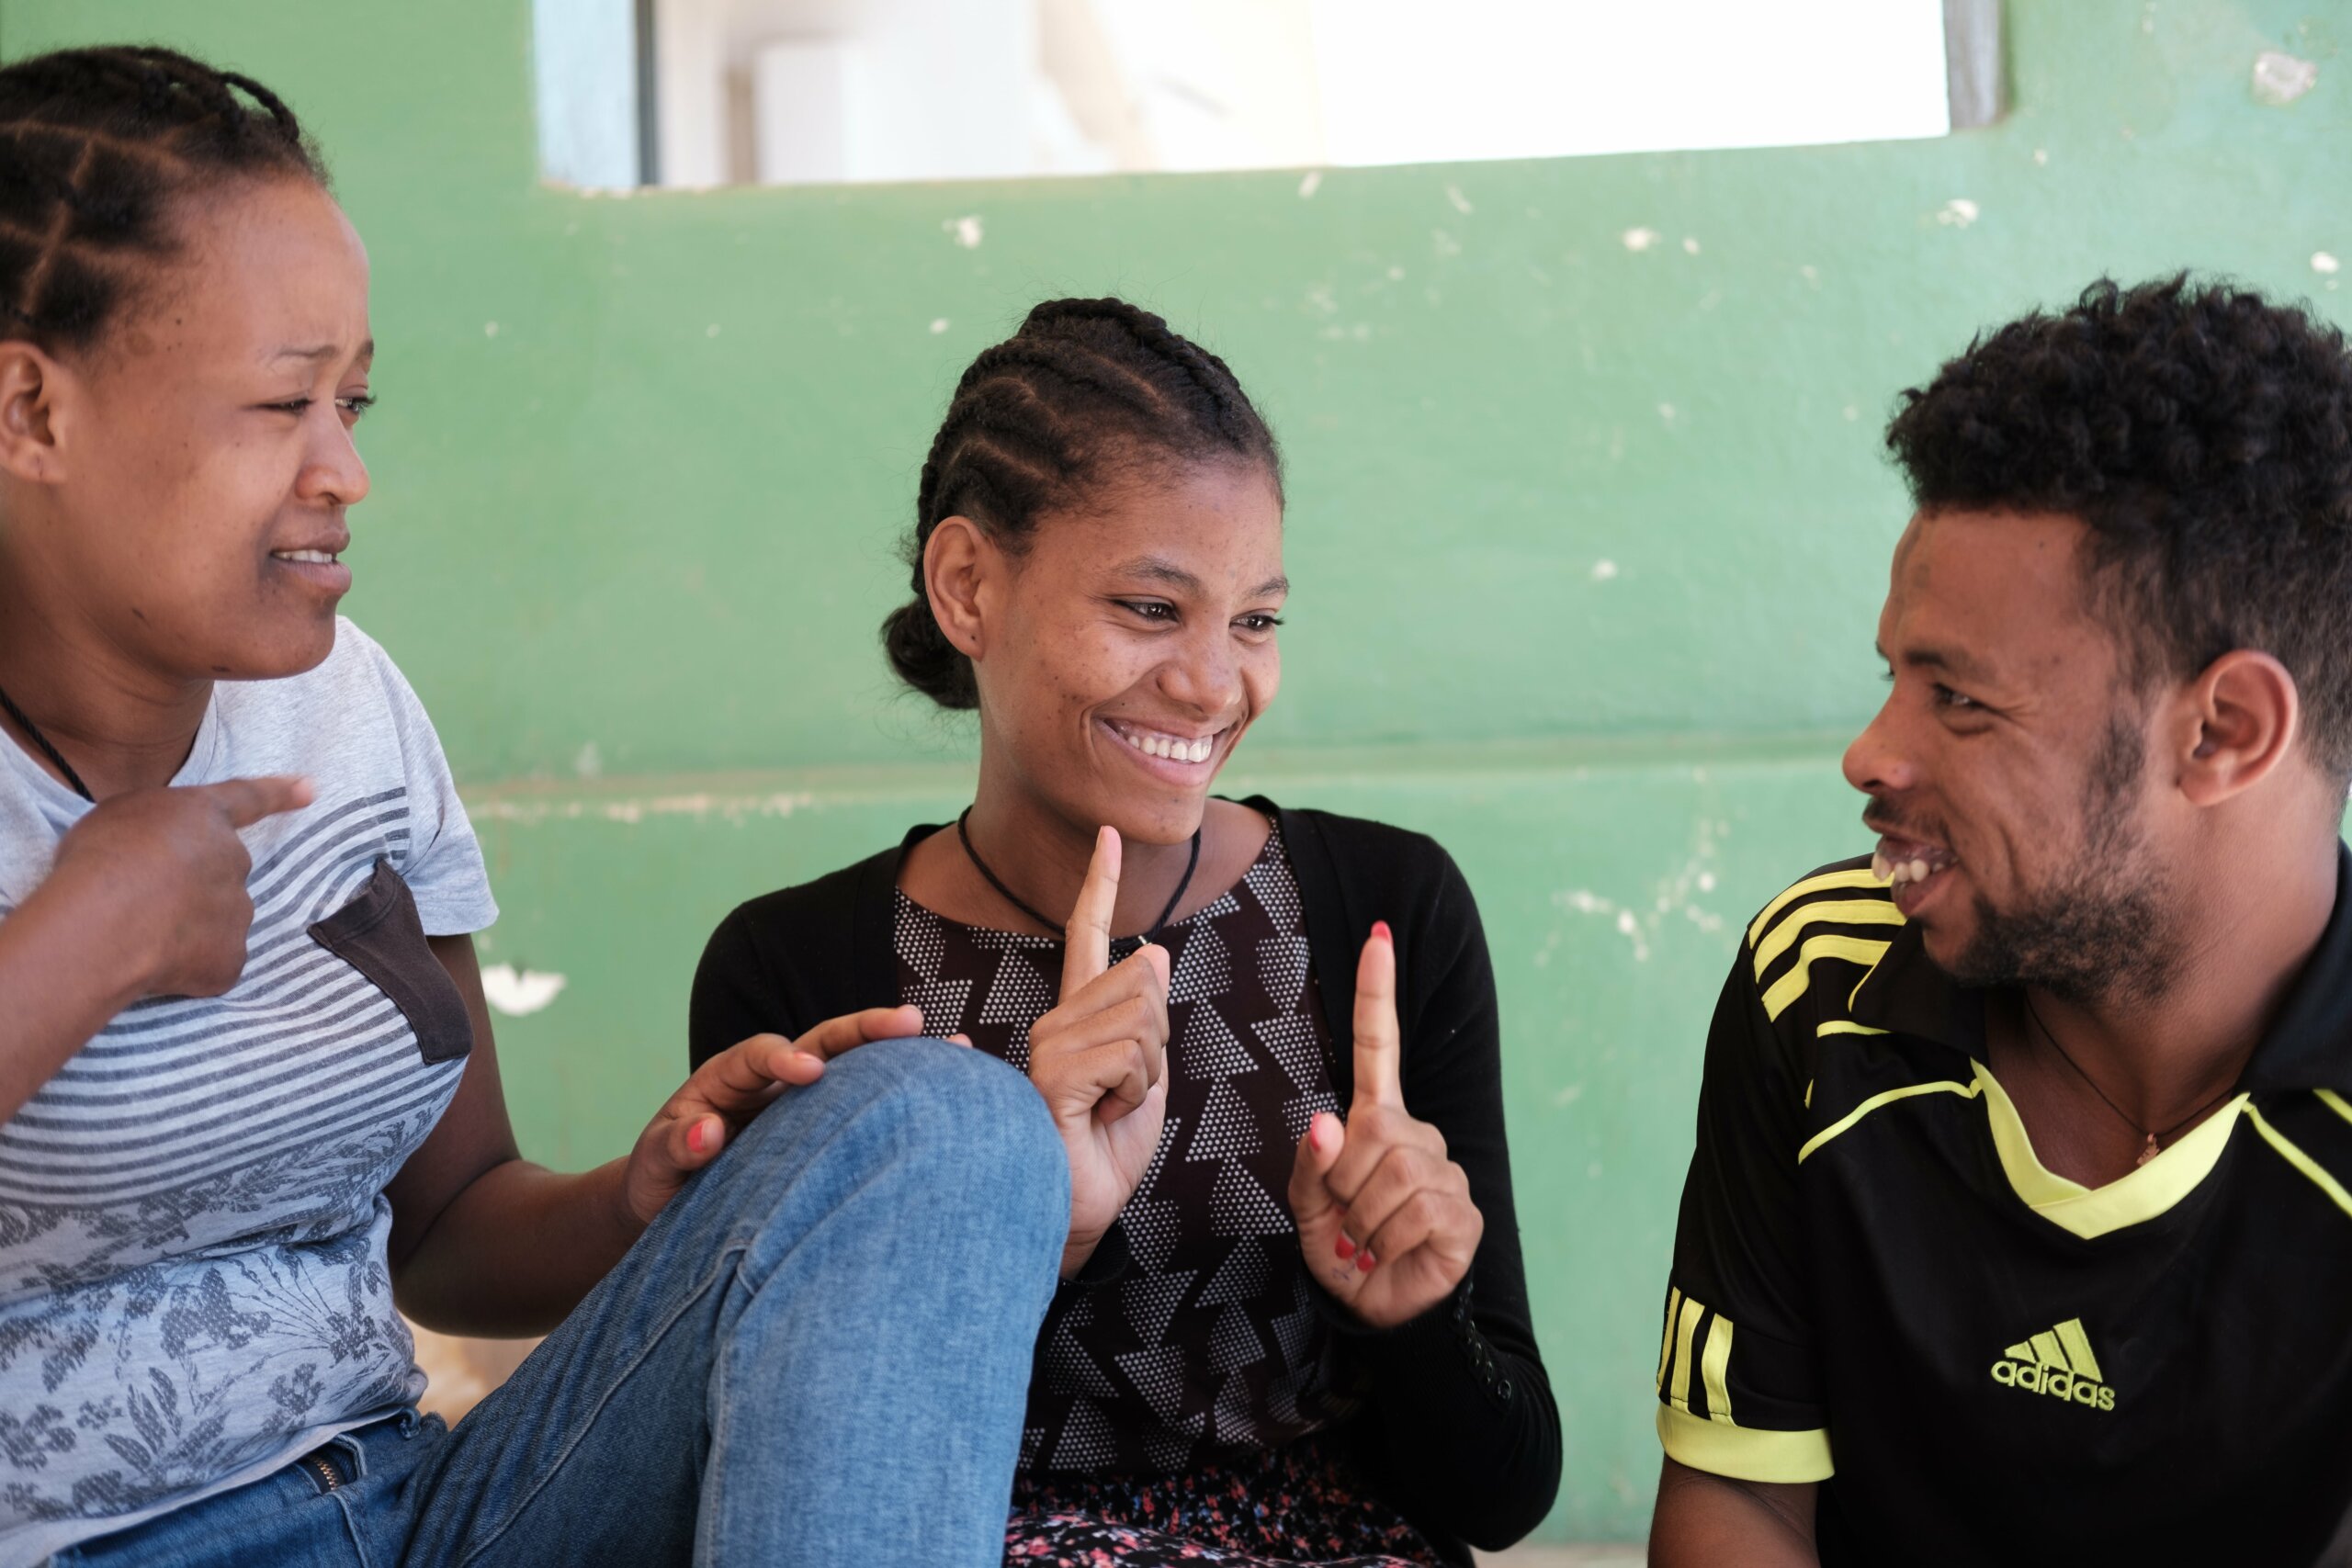 The image shows Mimi (centre) speaking sign language with her two friends on either side of her.